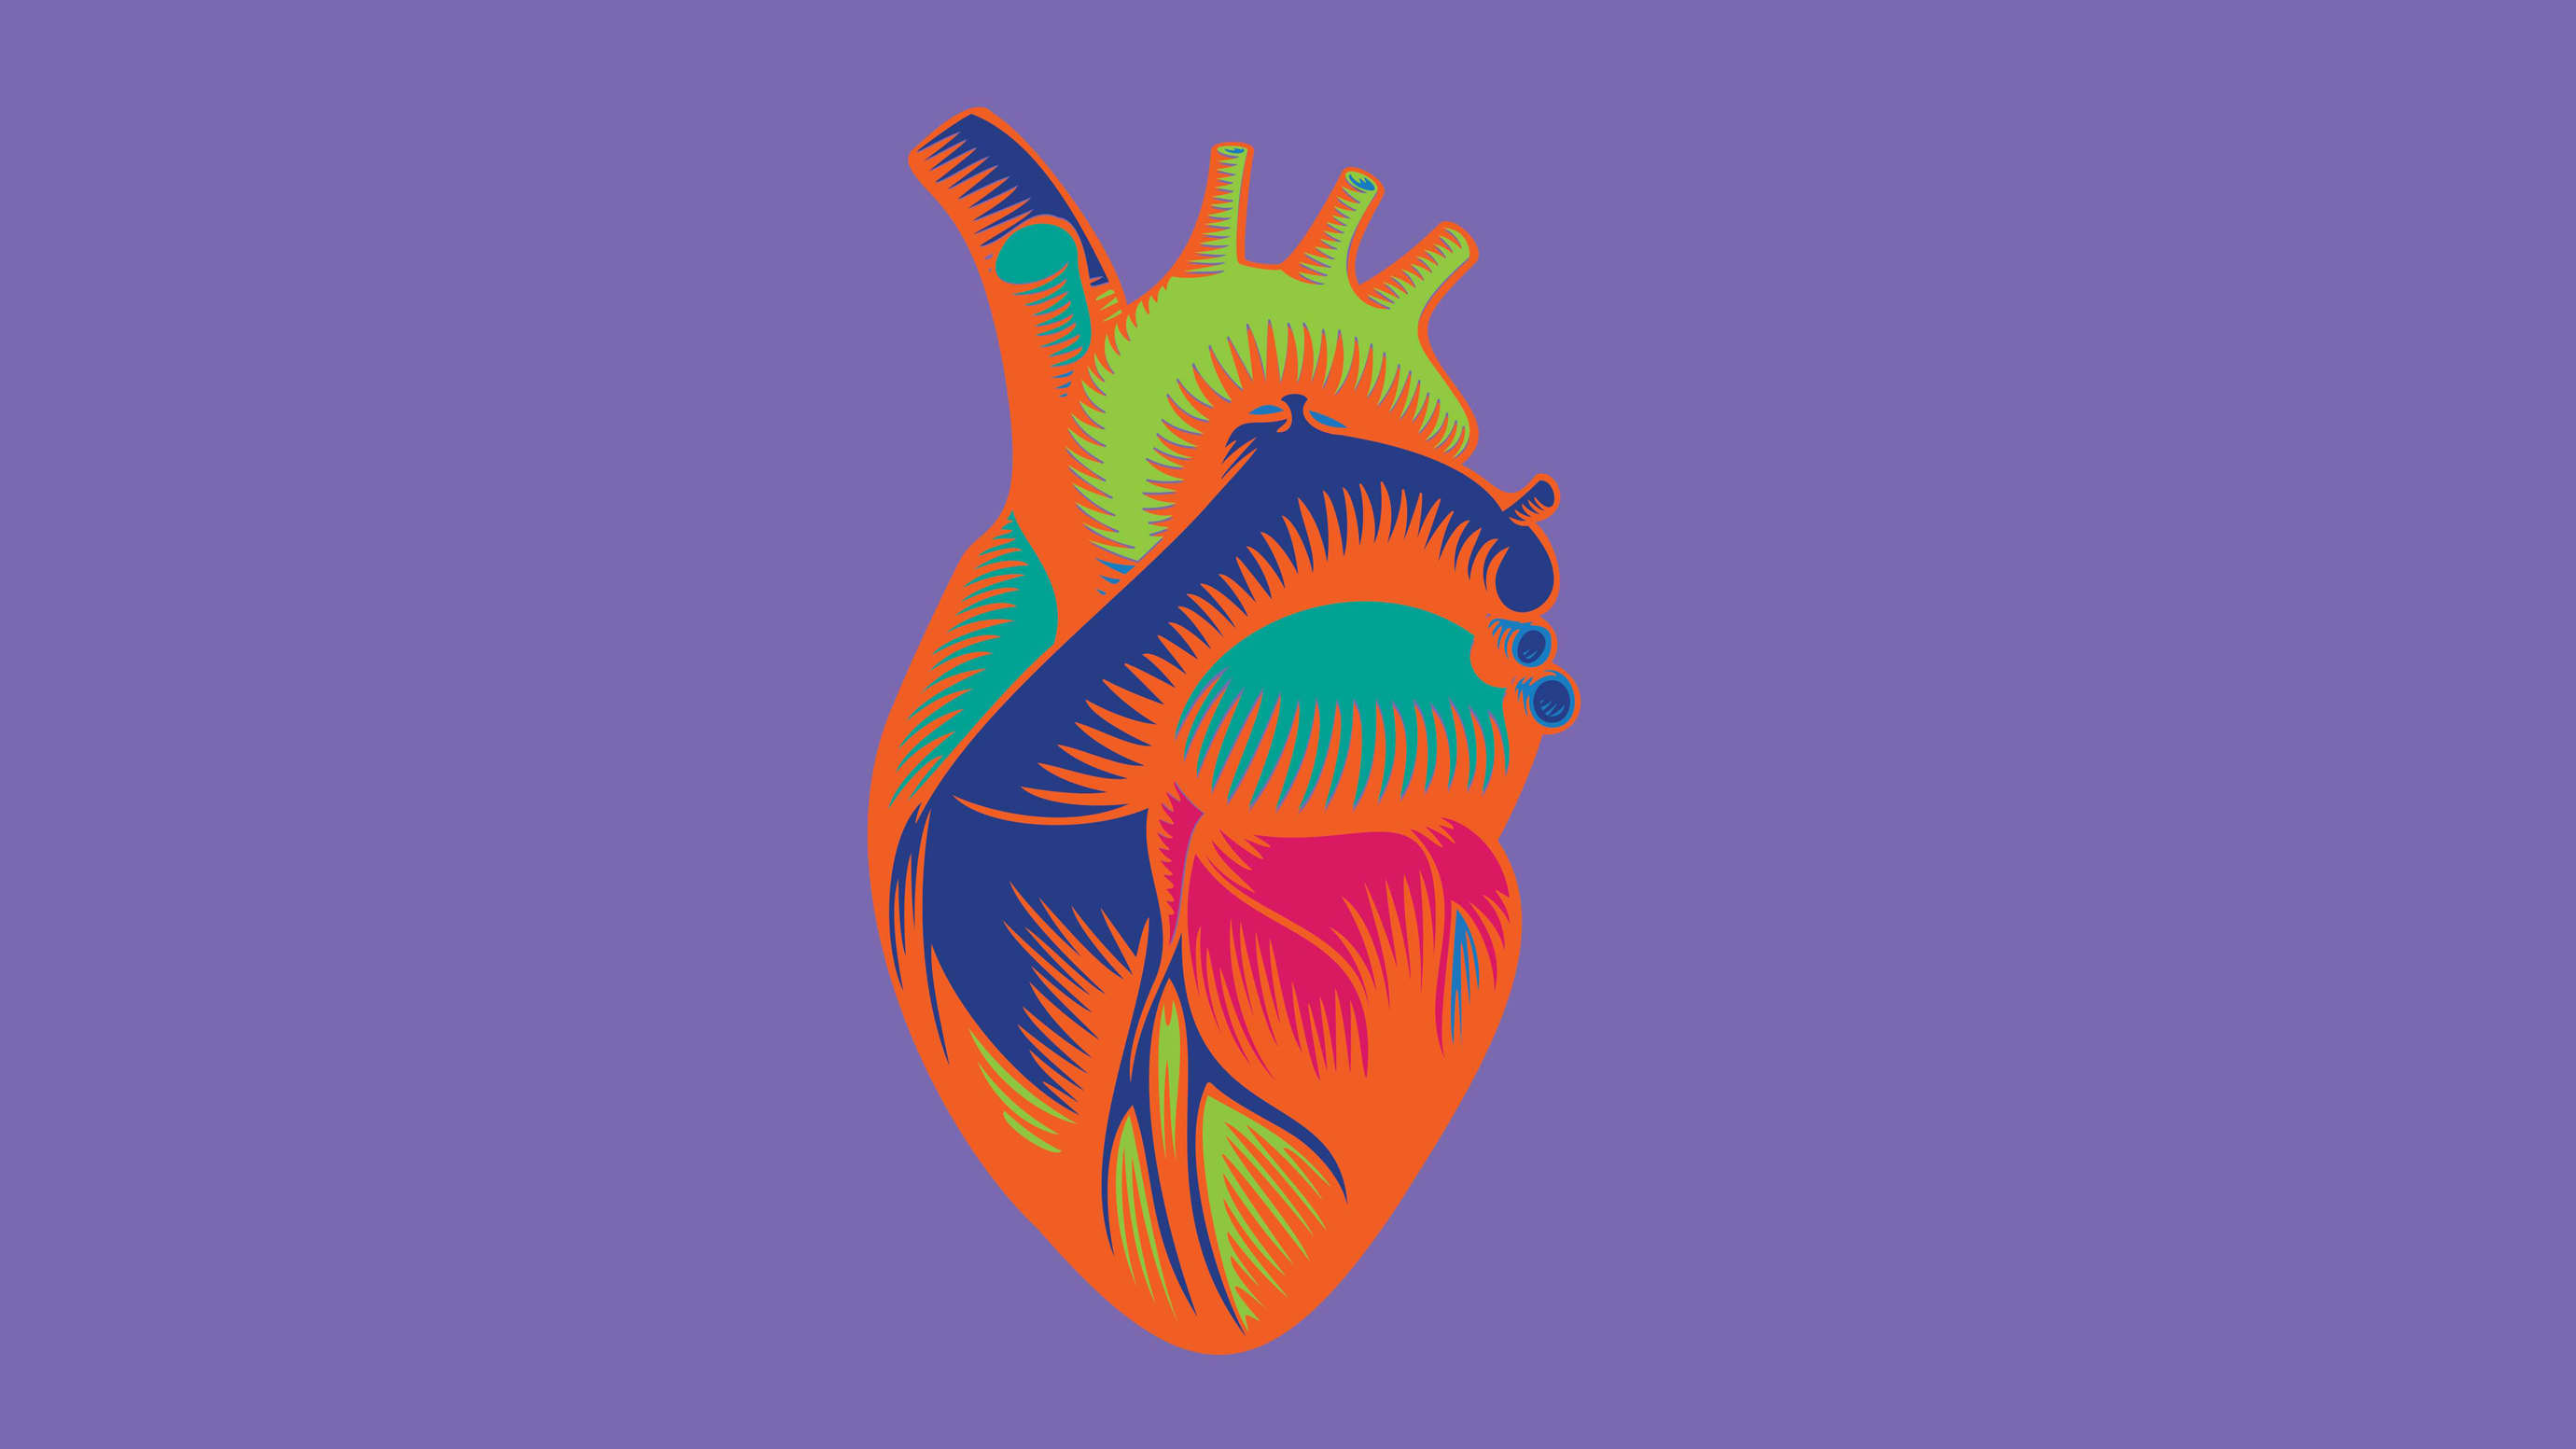 Anatomical illustration of an orange, blue, and green heart on a purple background.